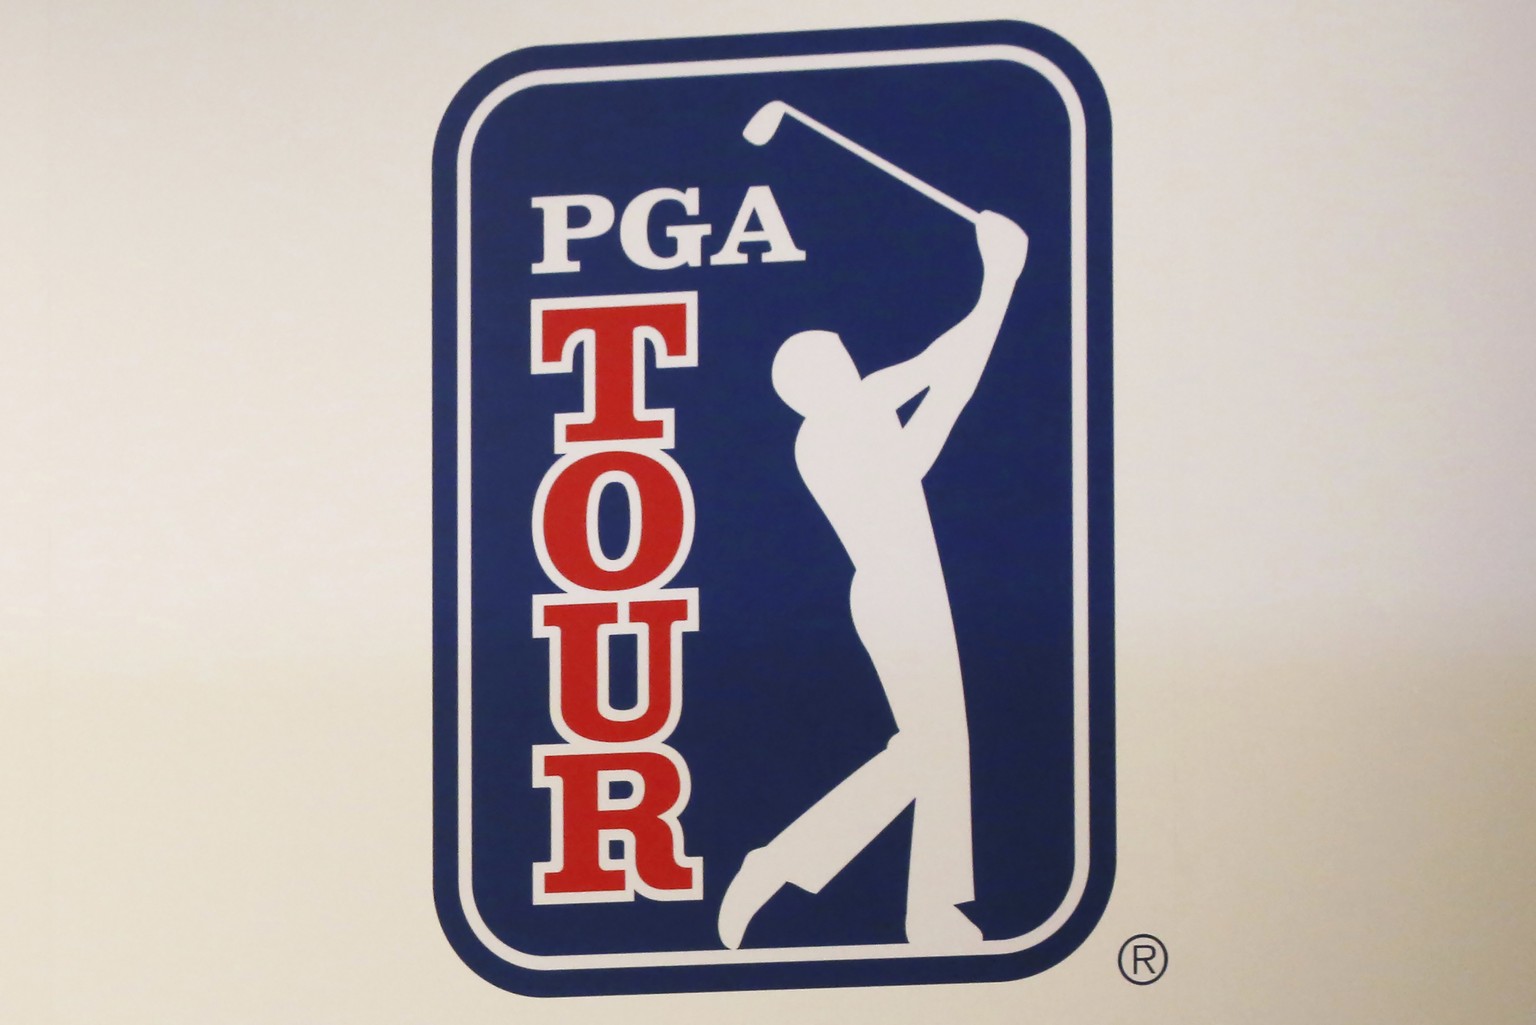 FILE - The PGA Tour logo is shown during a press conference in Tokyo, Nov. 20, 2018. The most disruptive year in golf ended Tuesday, June 6, 2023, when the PGA Tour and European tour agreed to a merge ...